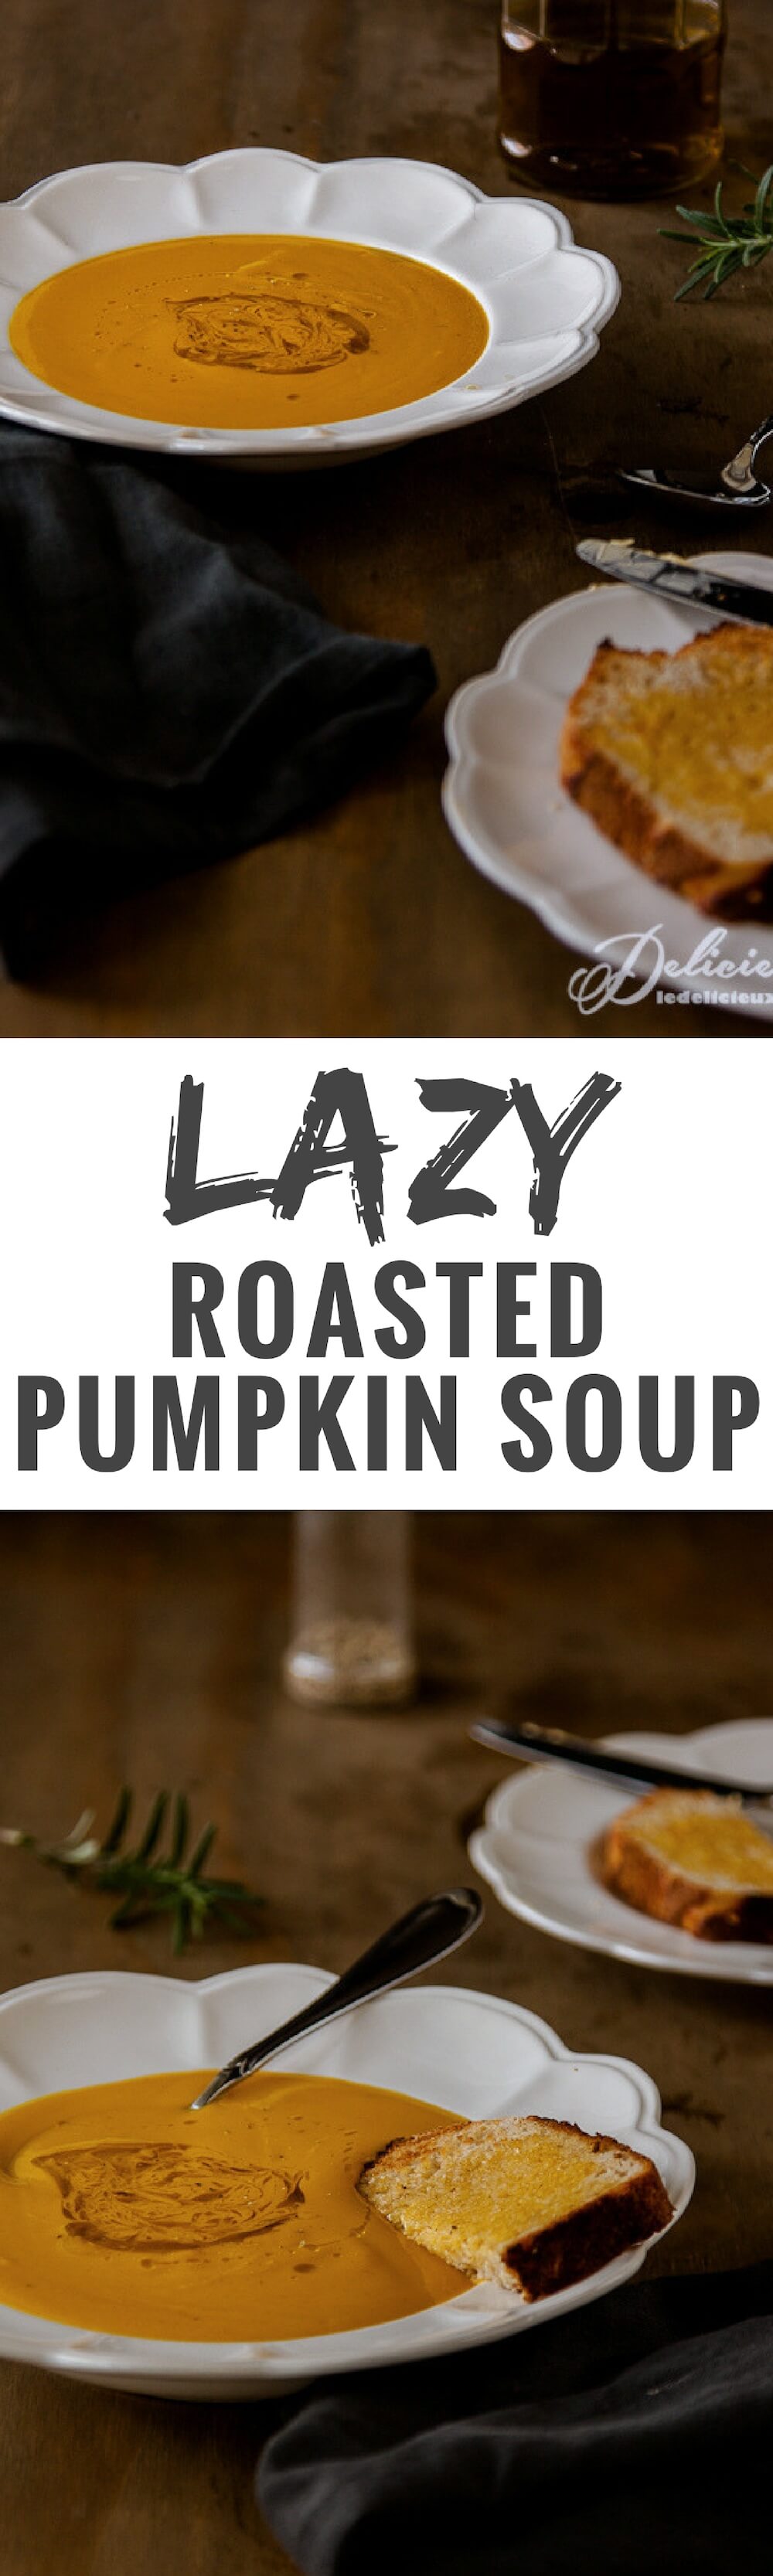 The ultimate lazy roasted pumpkin soup - super easy and super delicious!